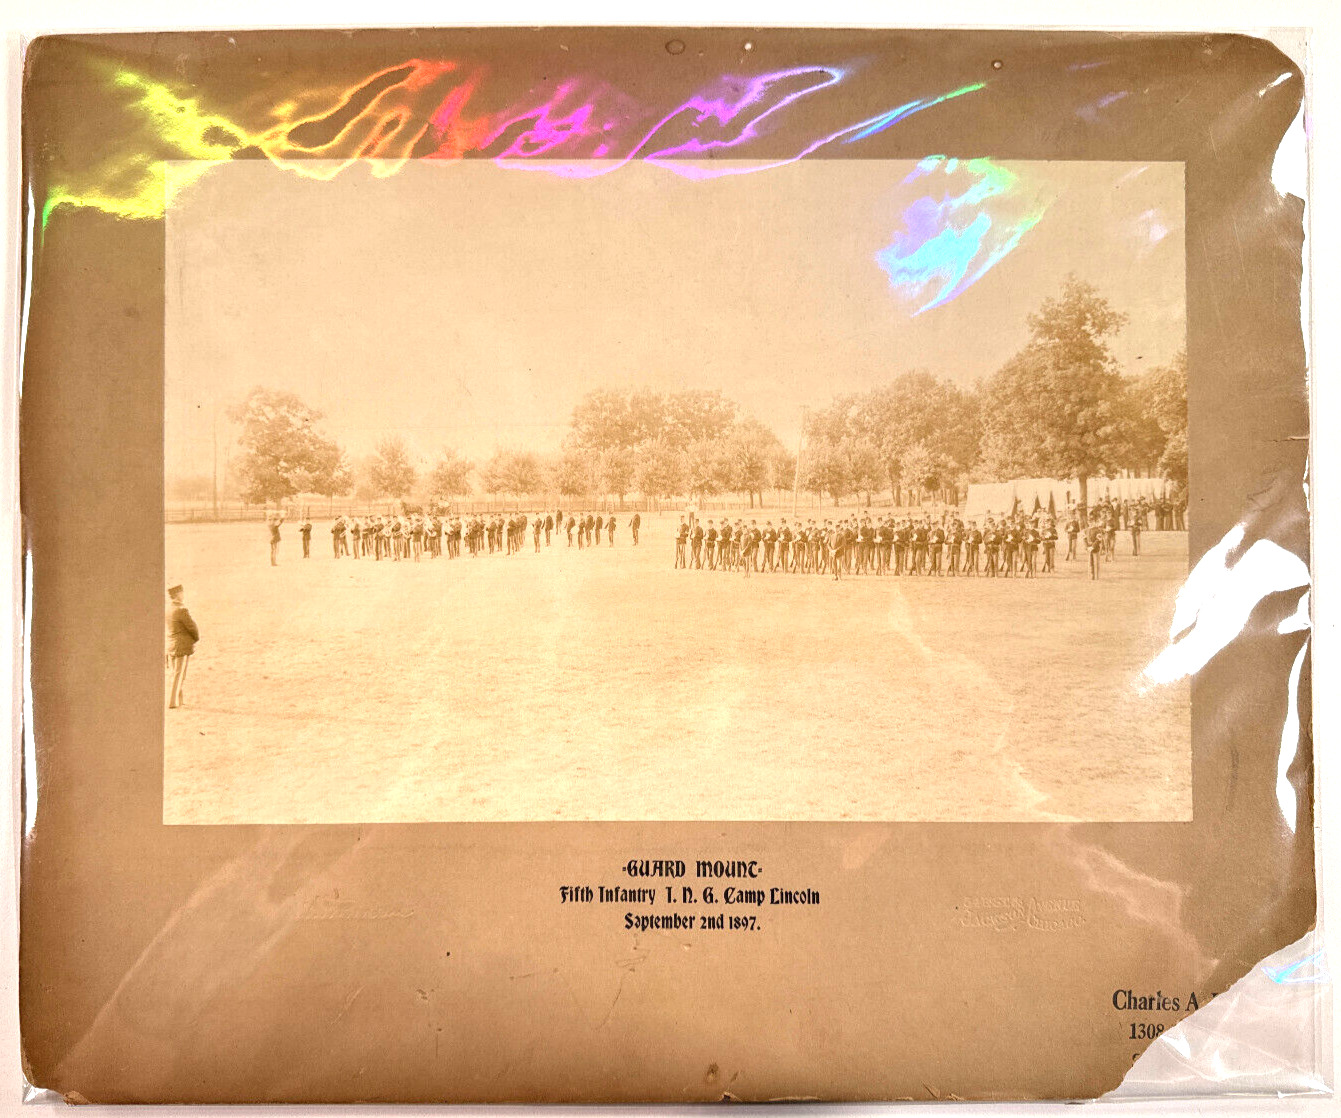 1897 US Guard 5th Infantry I.N.G. Camp Lincoln Chicago Il Spanish Am War Photo